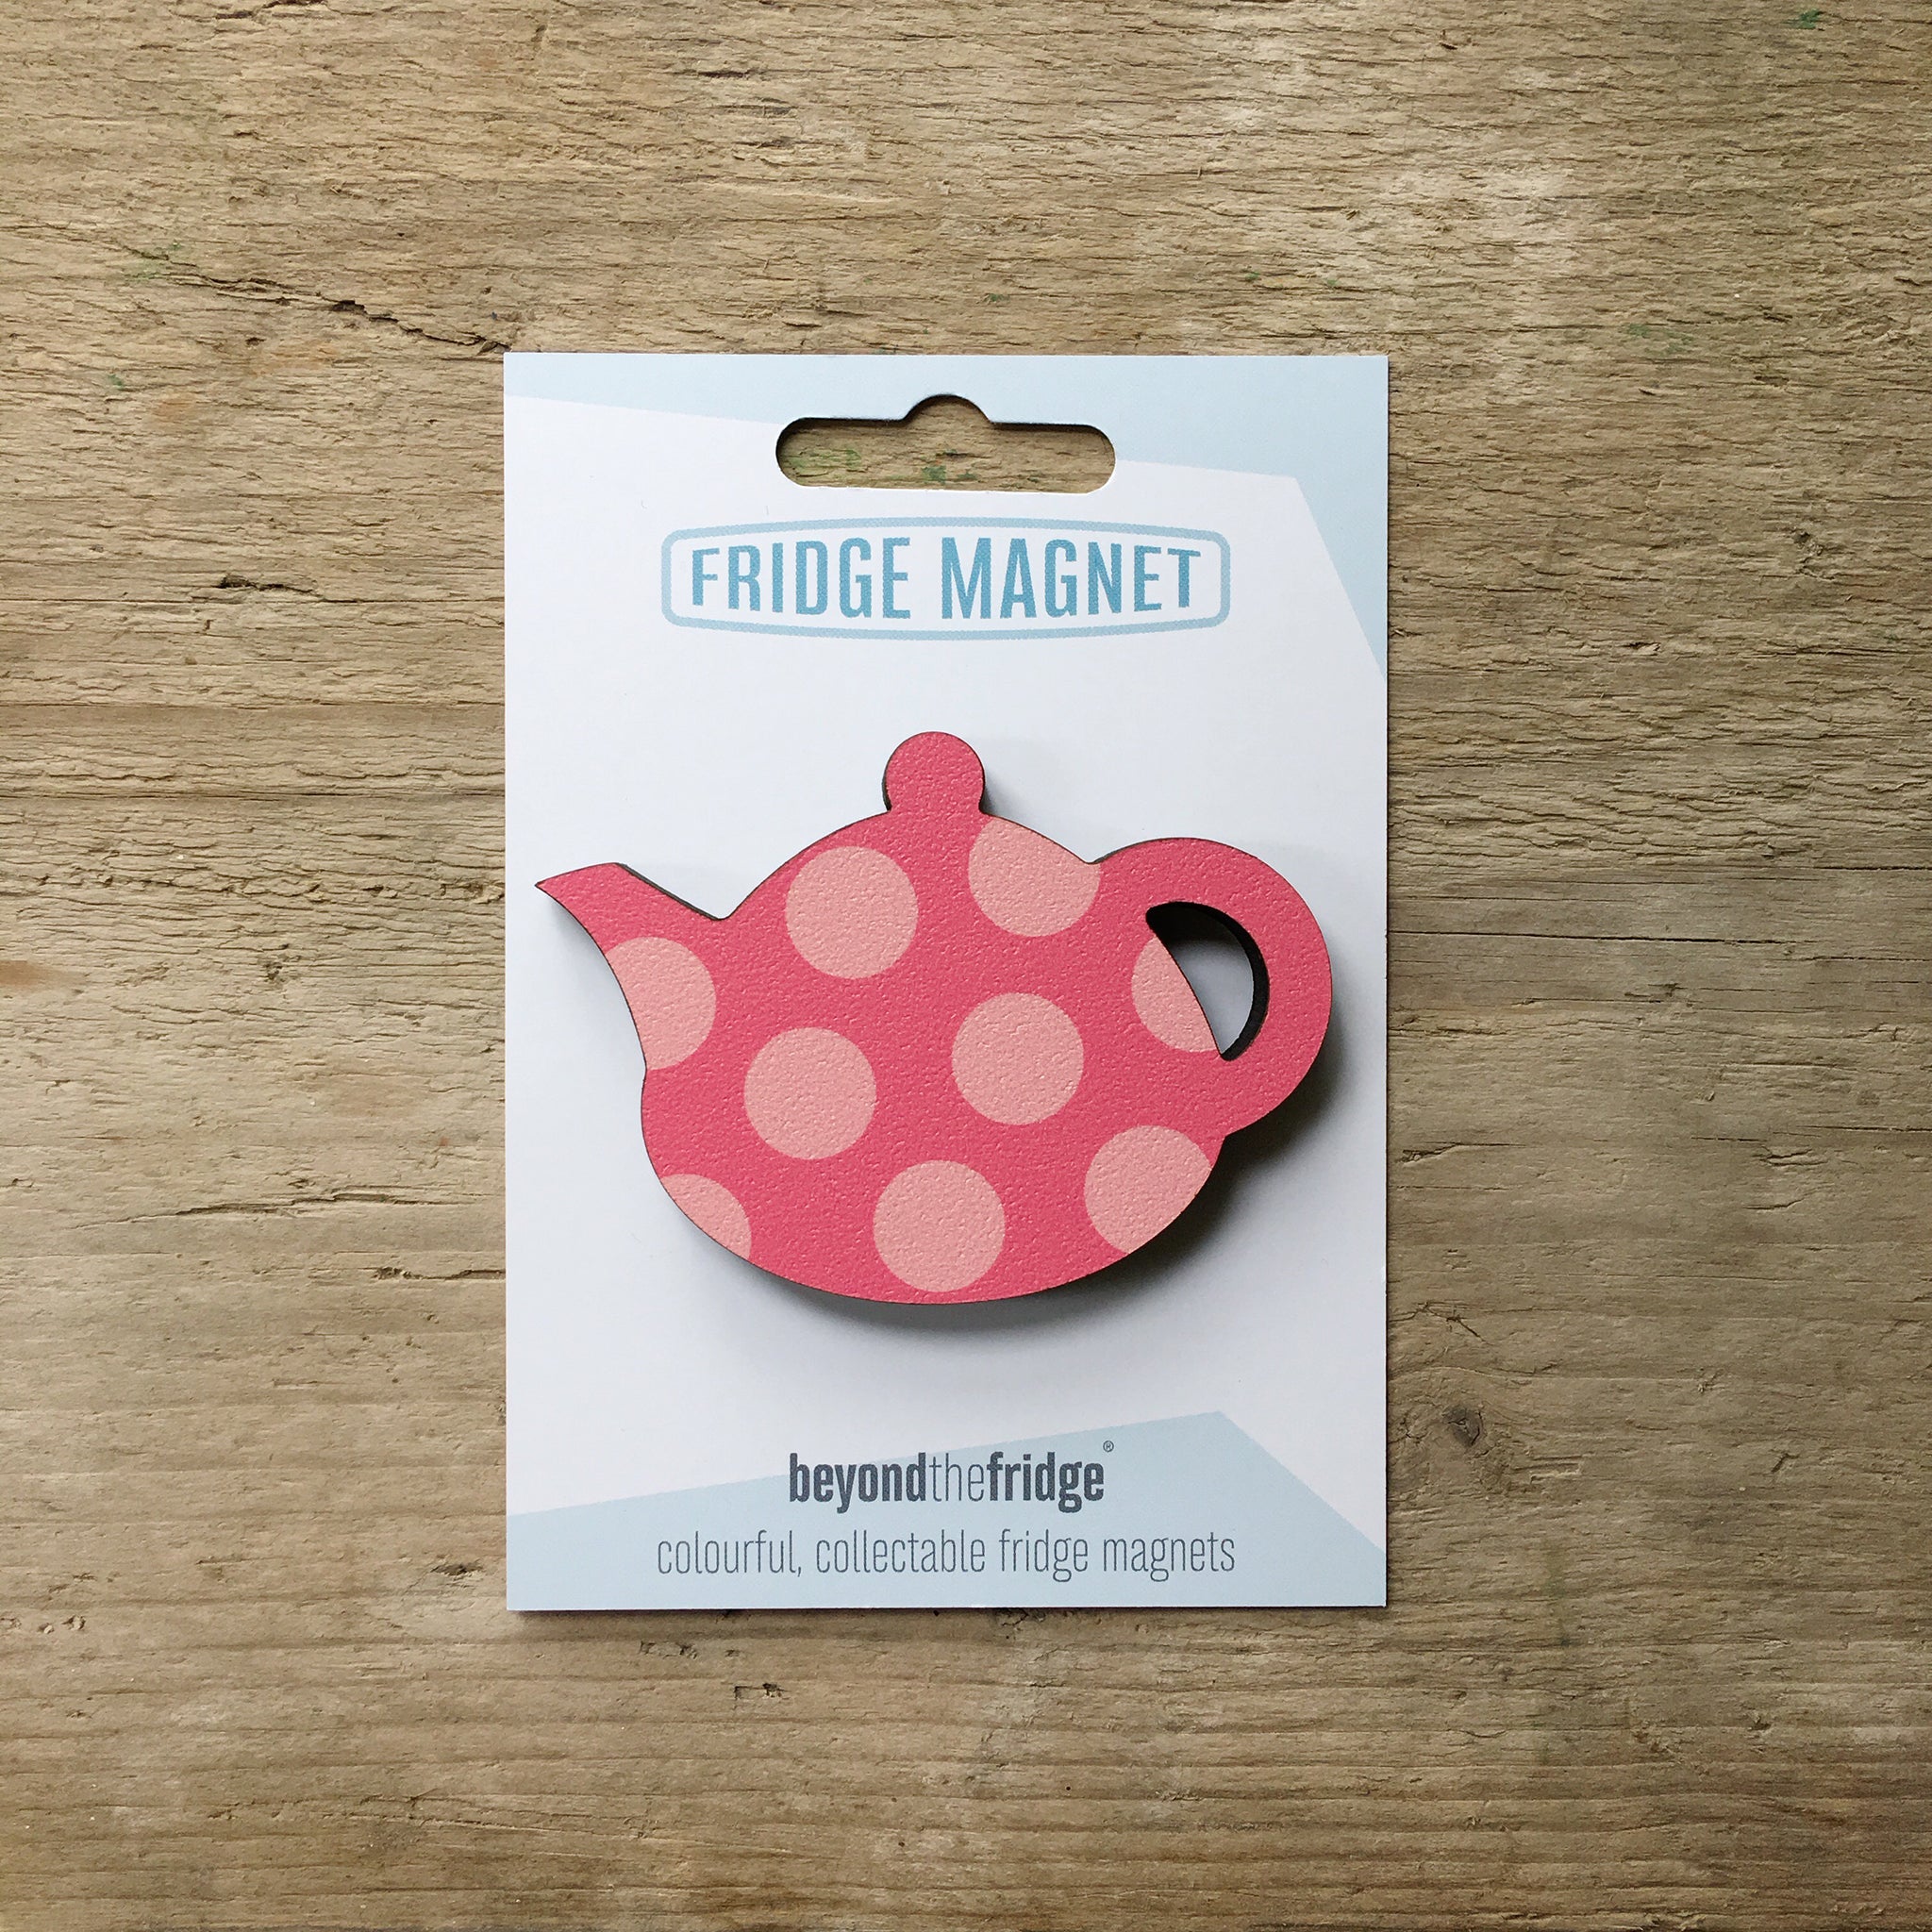 A pink spotty teapot design plywood fridge magnet by Beyond the Fridge in it’s pack on a wooden background